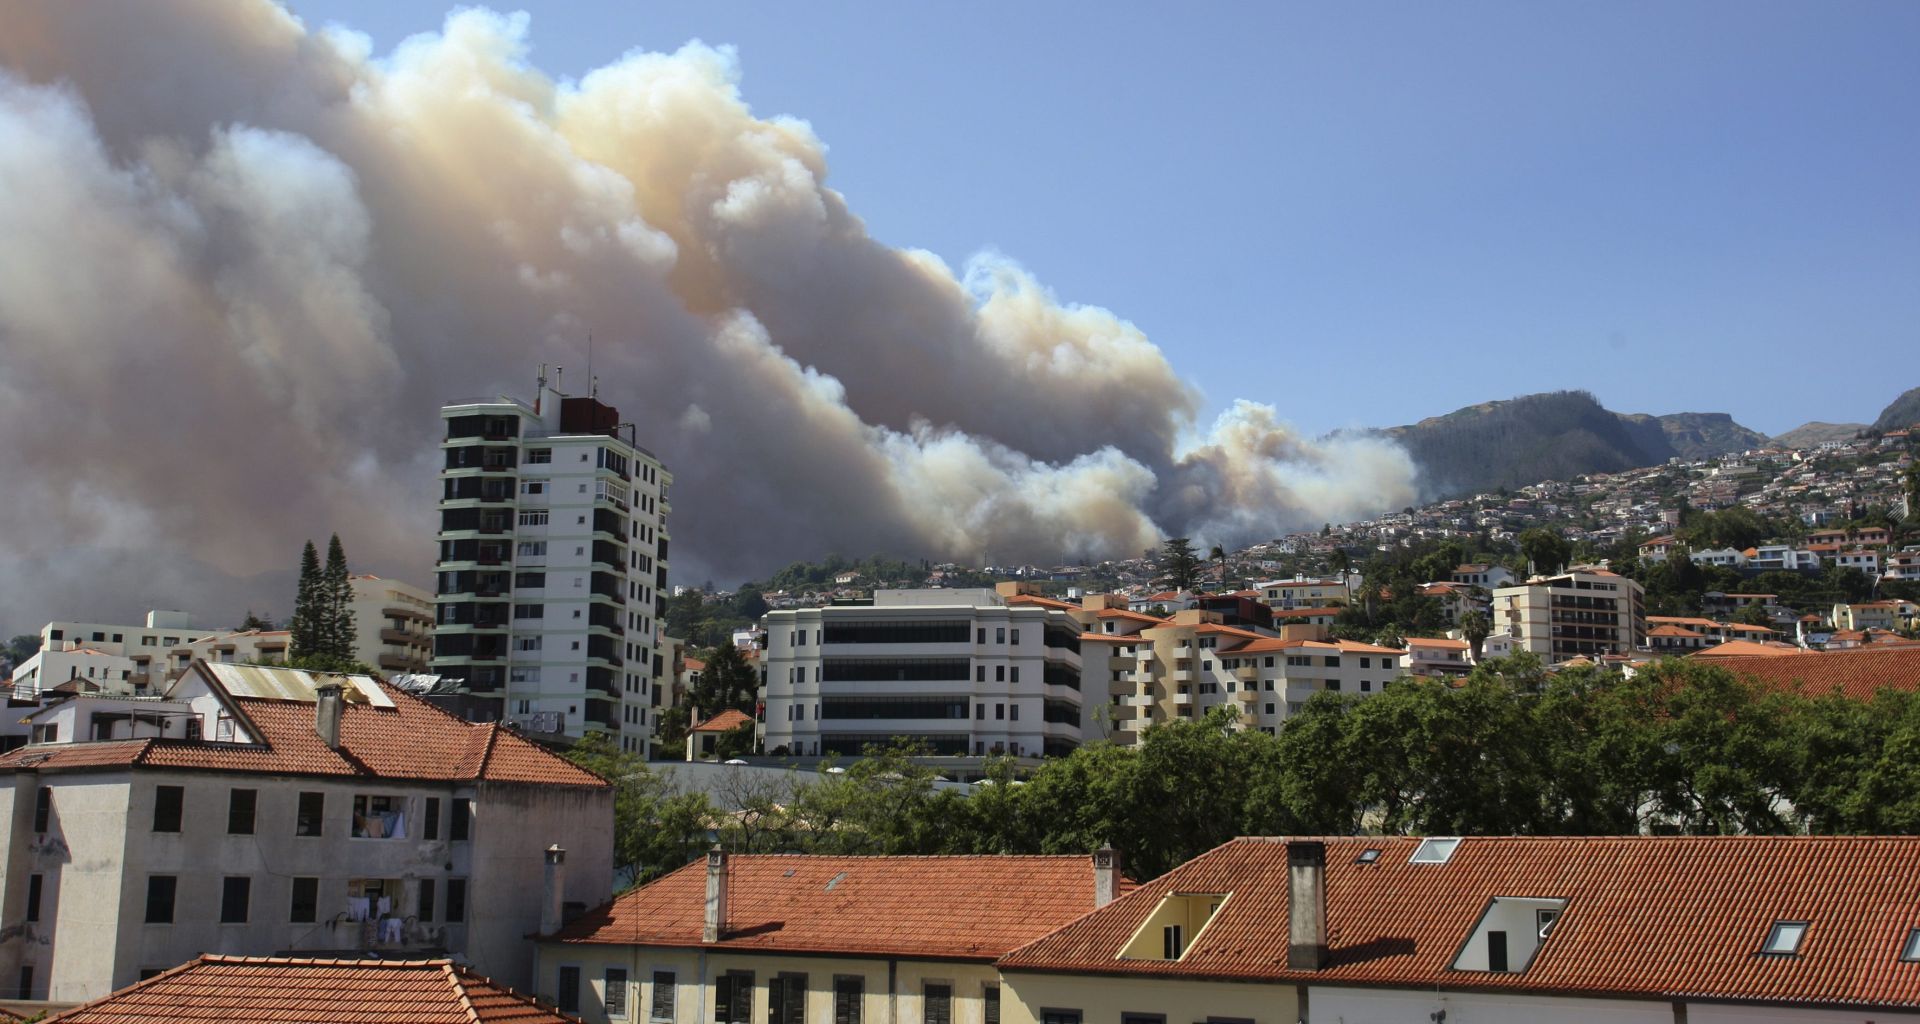 epa05464954 A fire in Funchal, Madeira, Portugal, 8 August 2016. Two fire brigades of Funchal, supported by three other from Madeira, were now mobilized to fight a fire that broke out in a forest area in San Roque.  EPA/JOAO HOMEM GOUVEIA